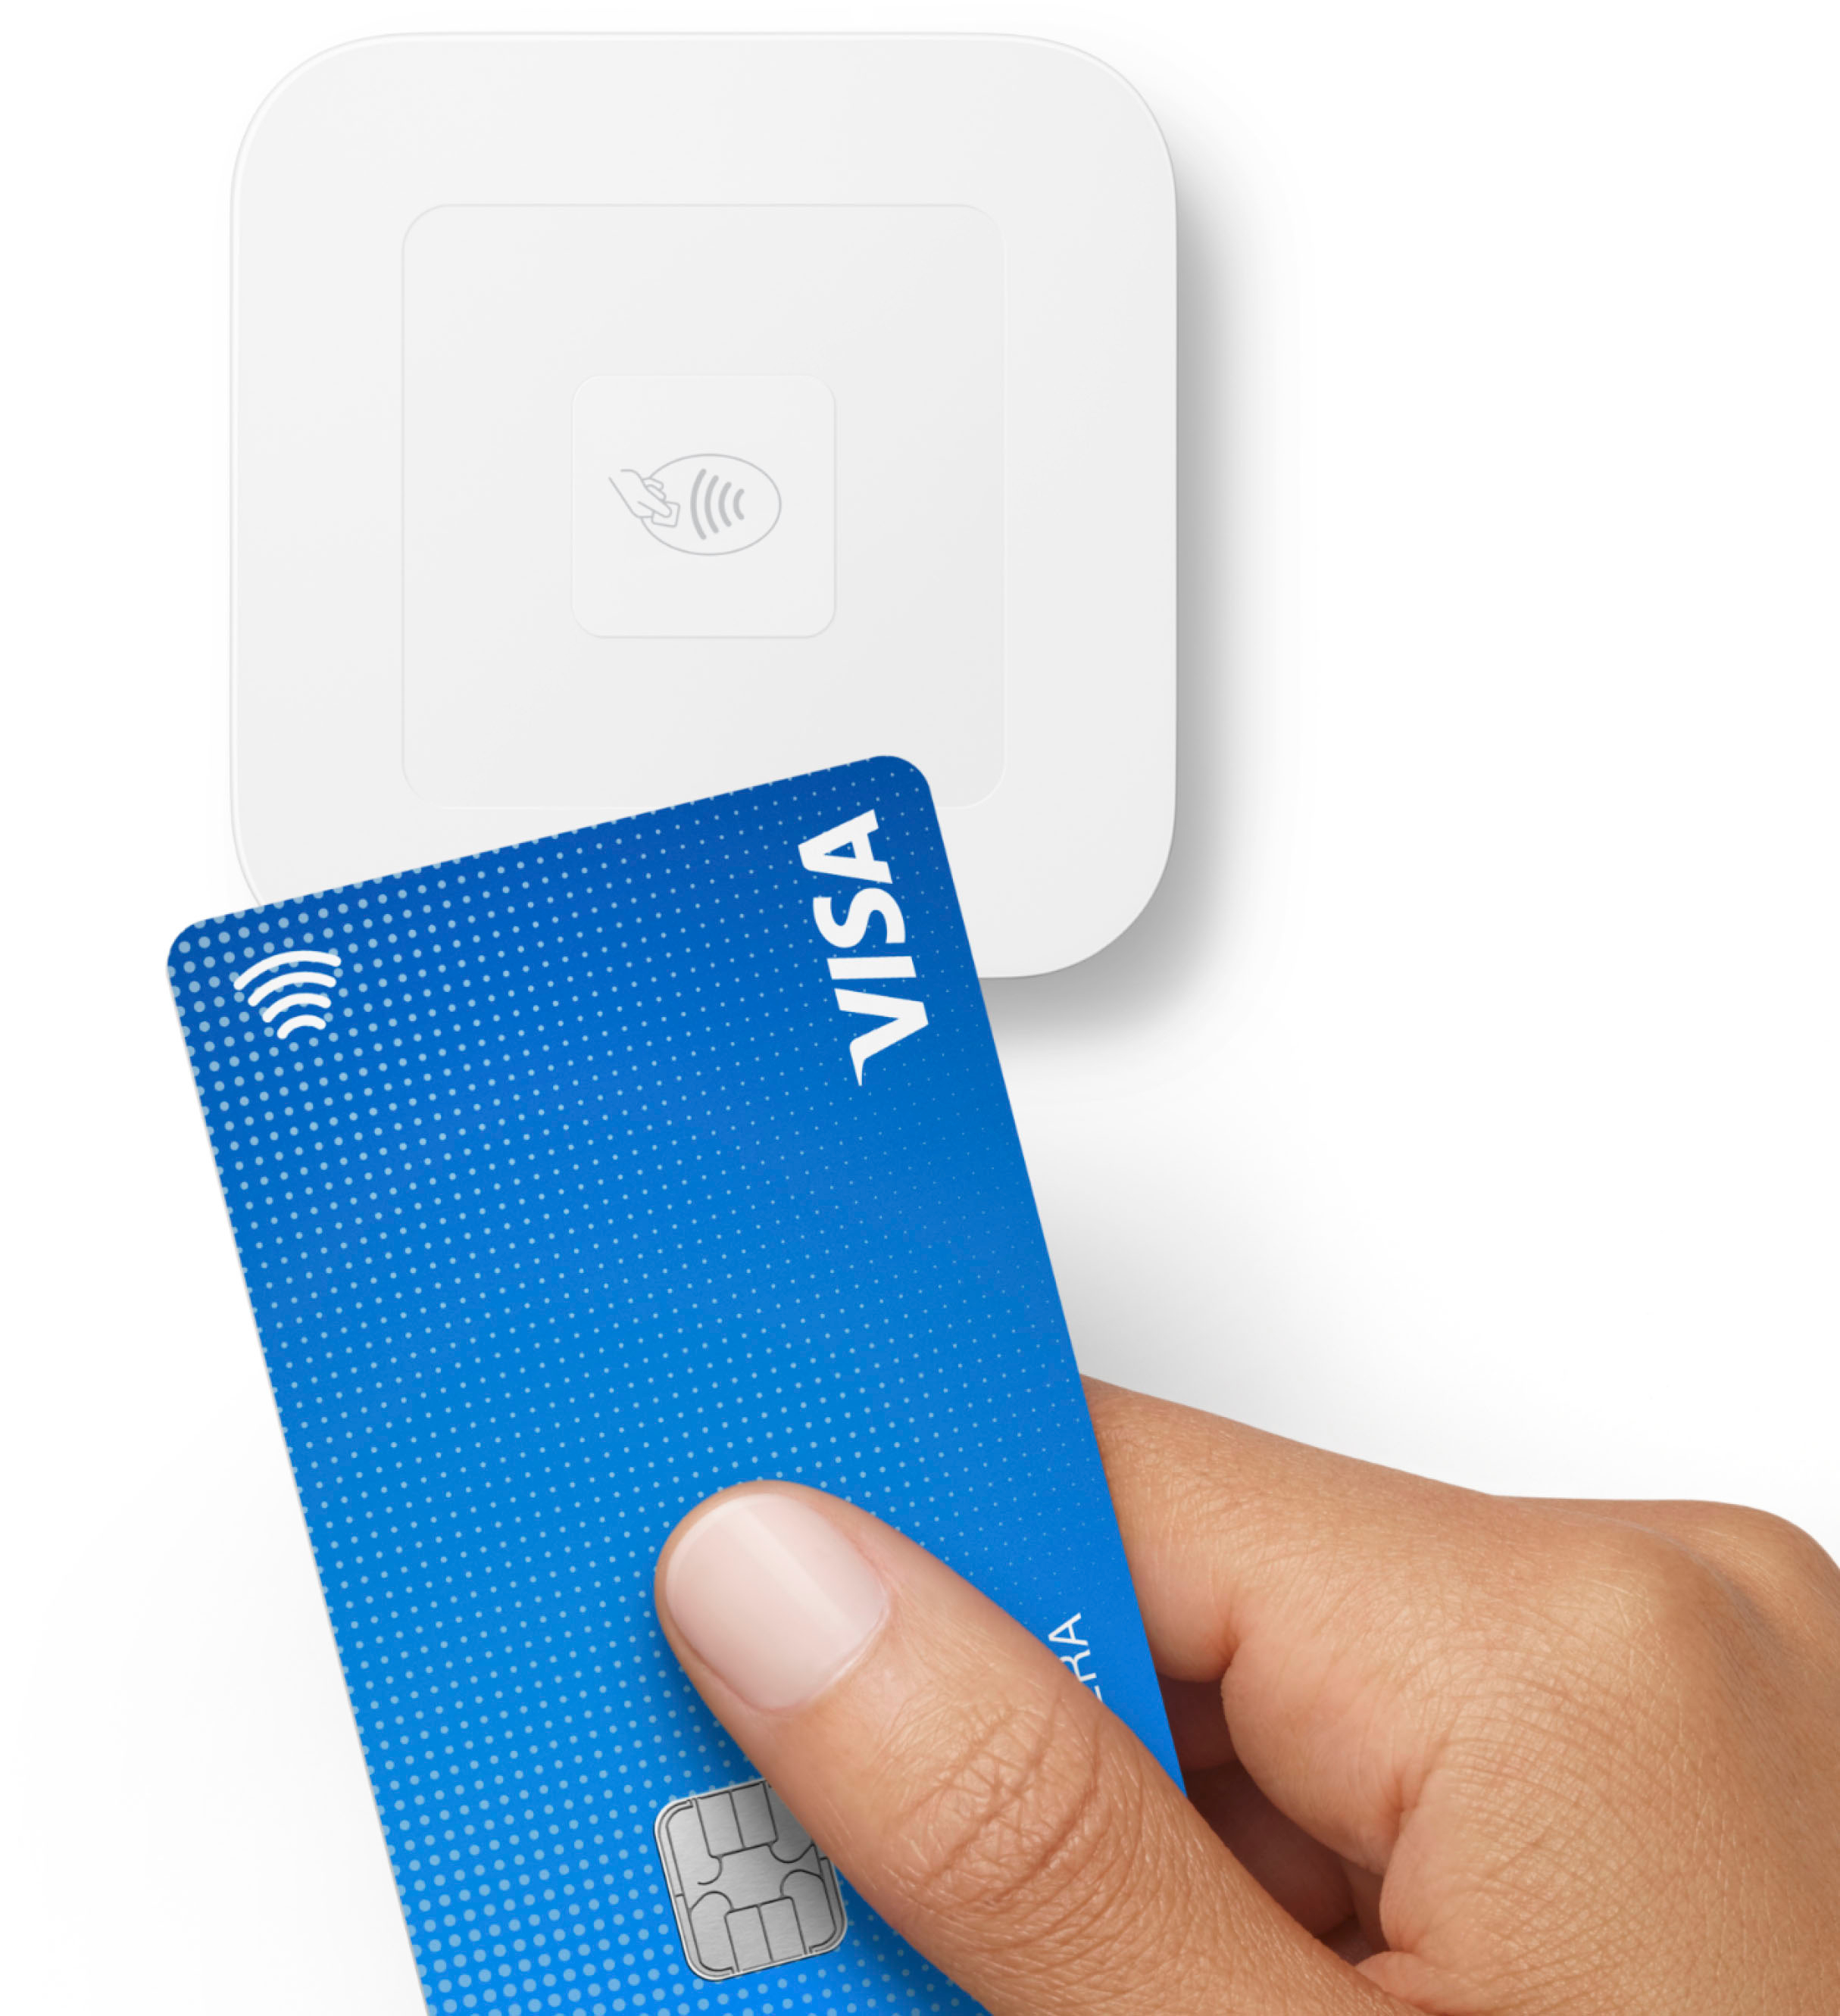 SumUp review: has Square met its match? Here's our experience